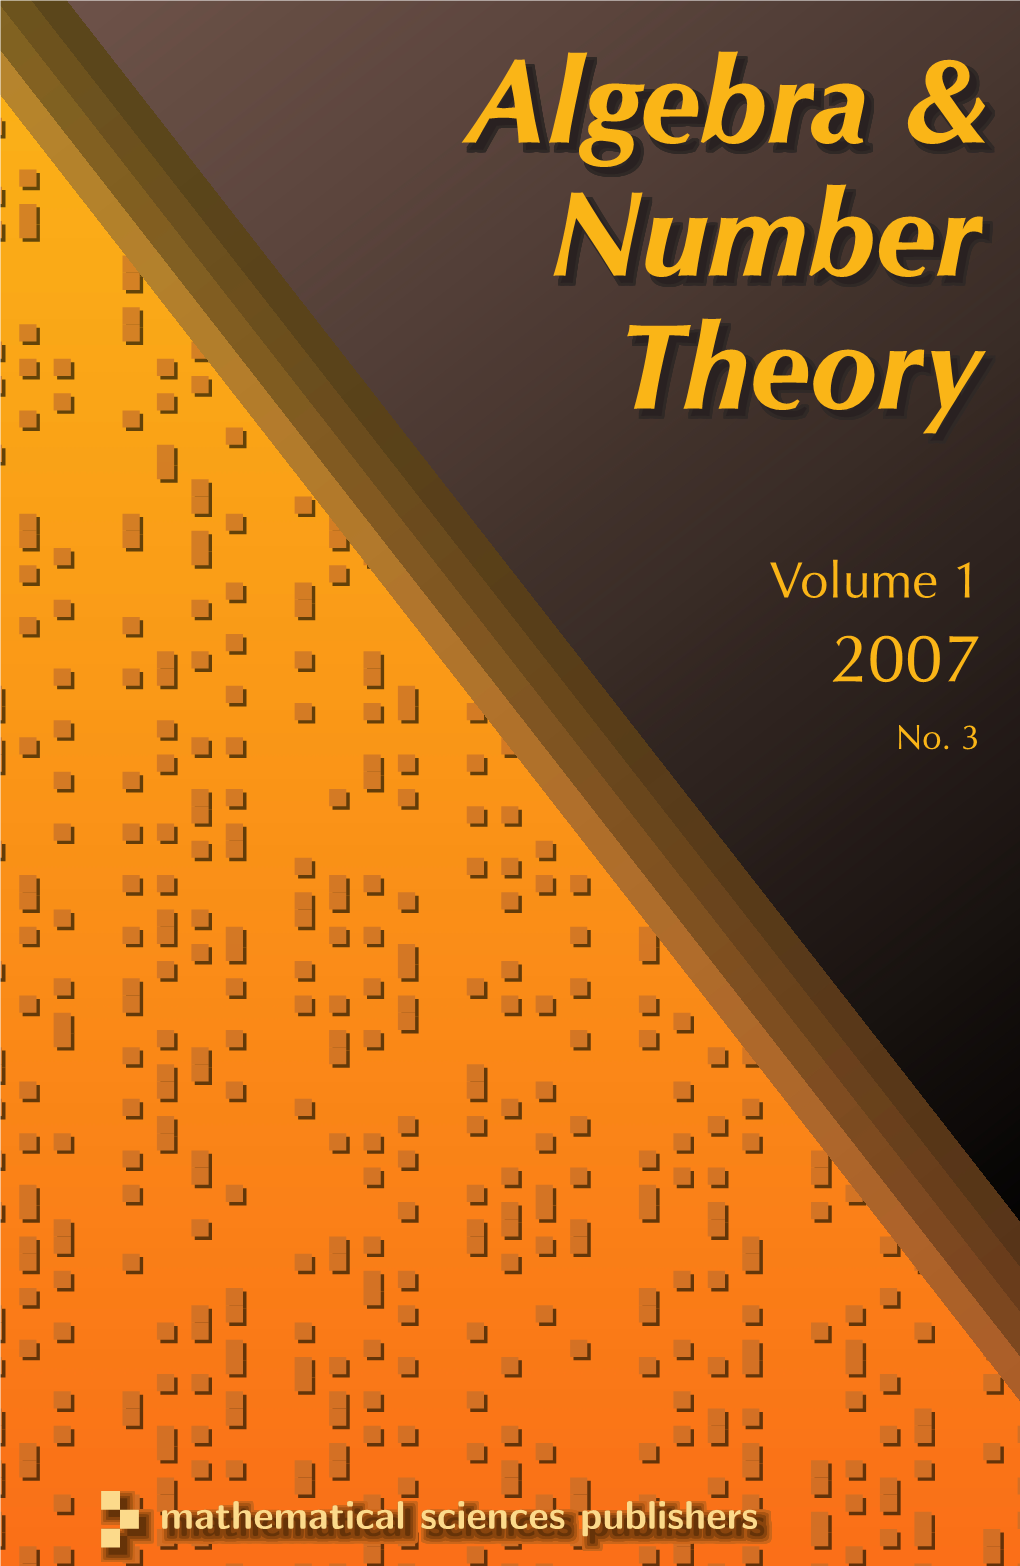 Algebra & Number Theory Vol 1 Issue 3, 2007